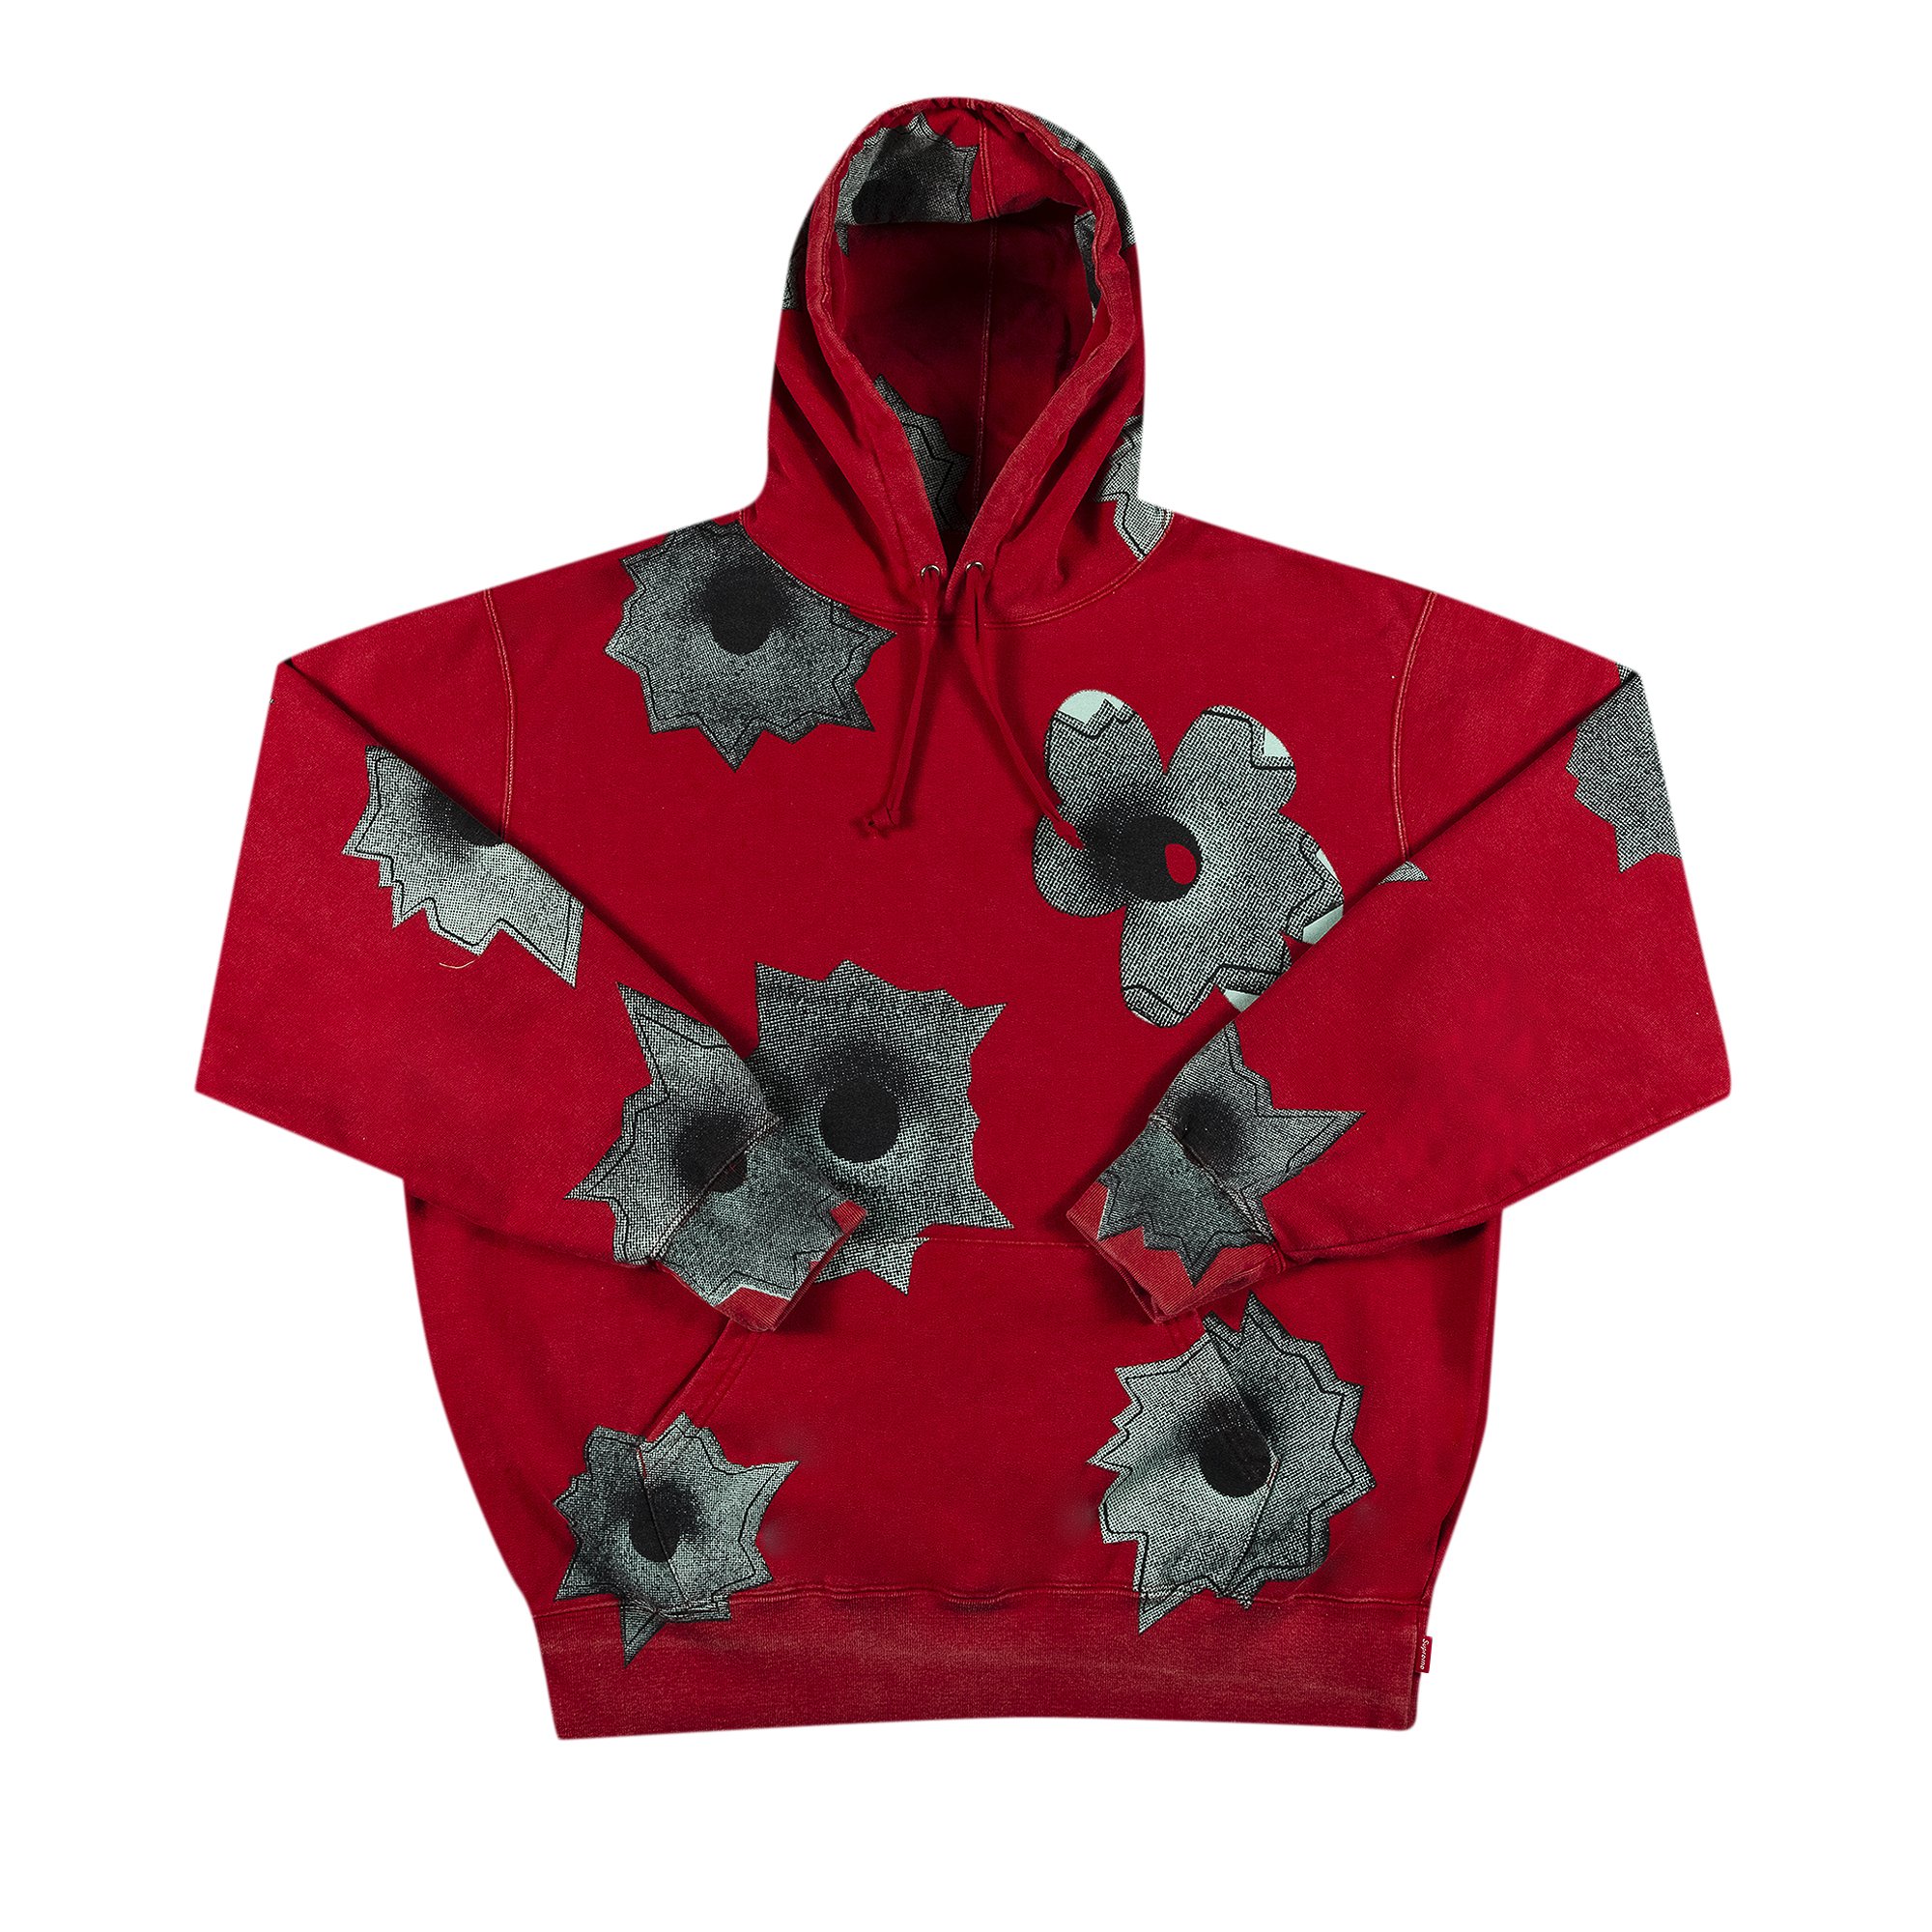 Buy Supreme x Nate Lowman Hooded Sweatshirt 'Red' - SS22SW65 RED